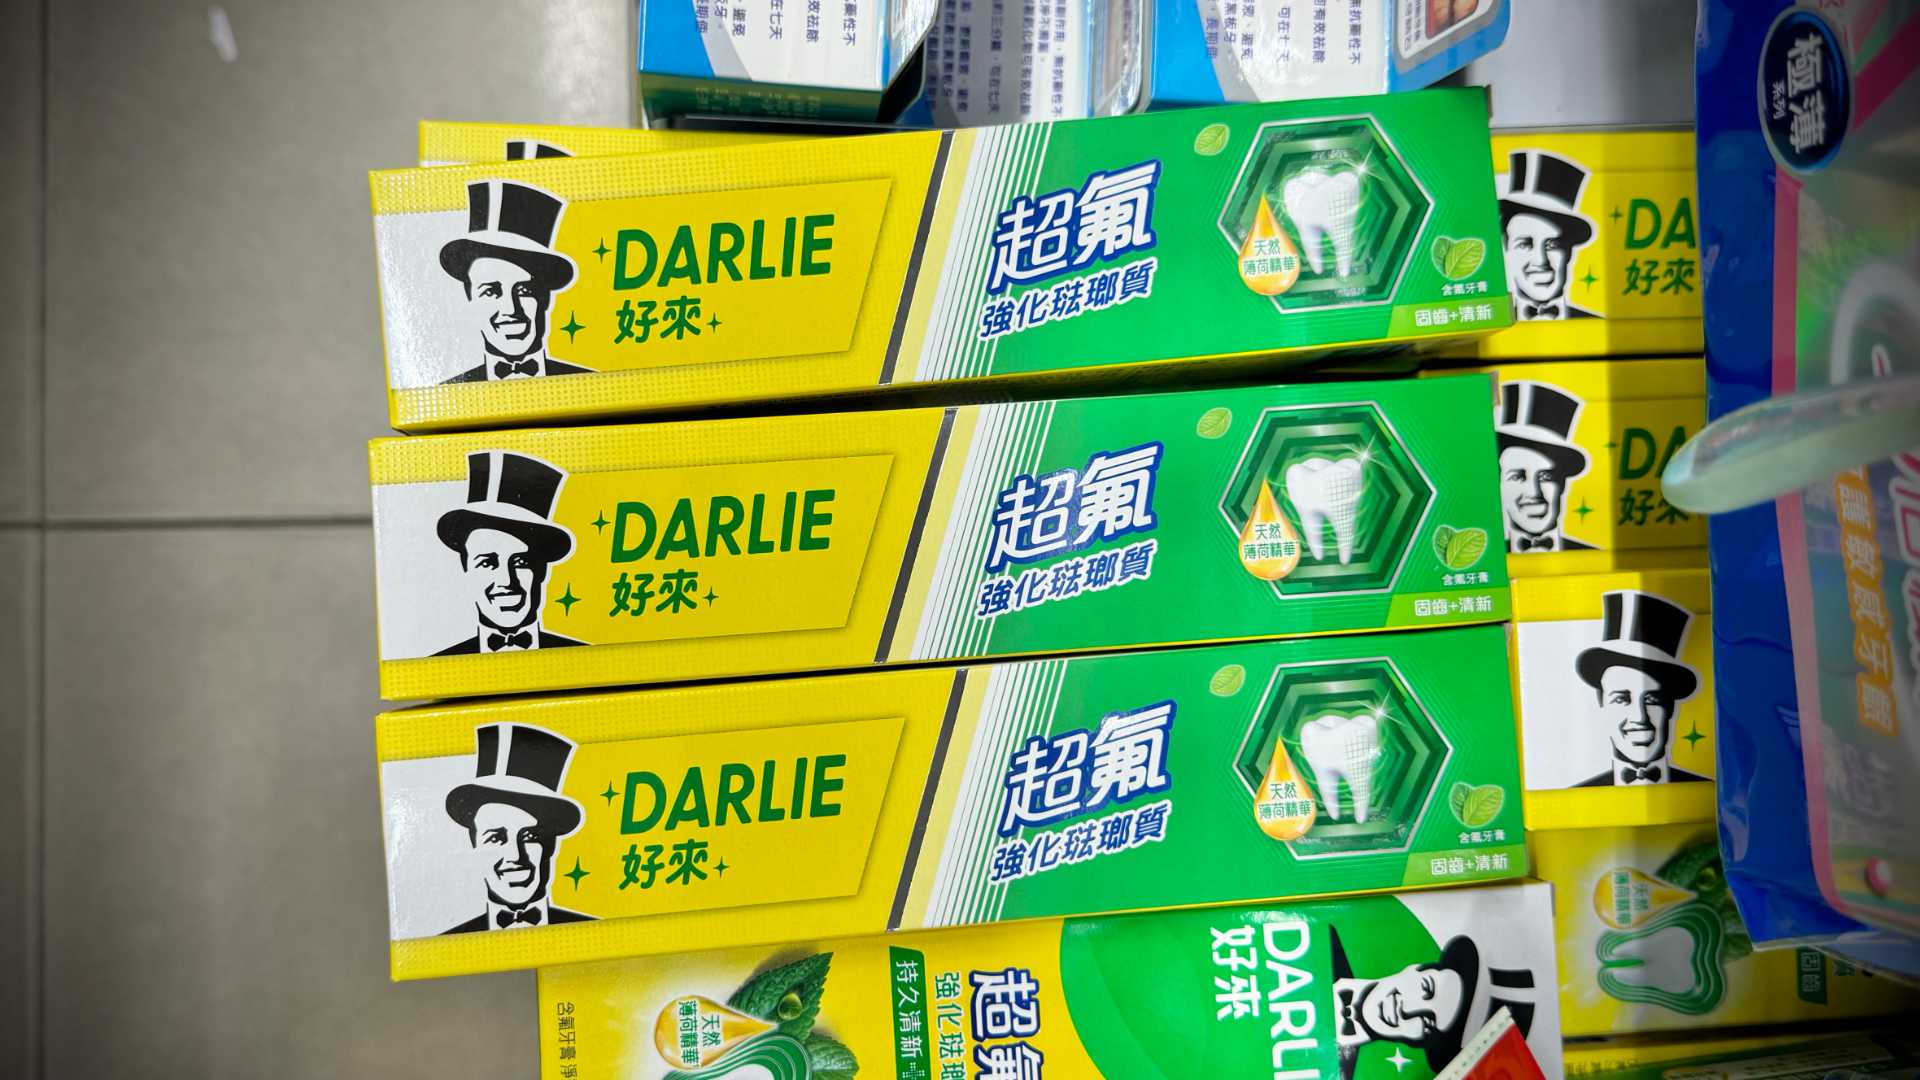 Boxes of Darlie toothpaste on a supermarket shelf.